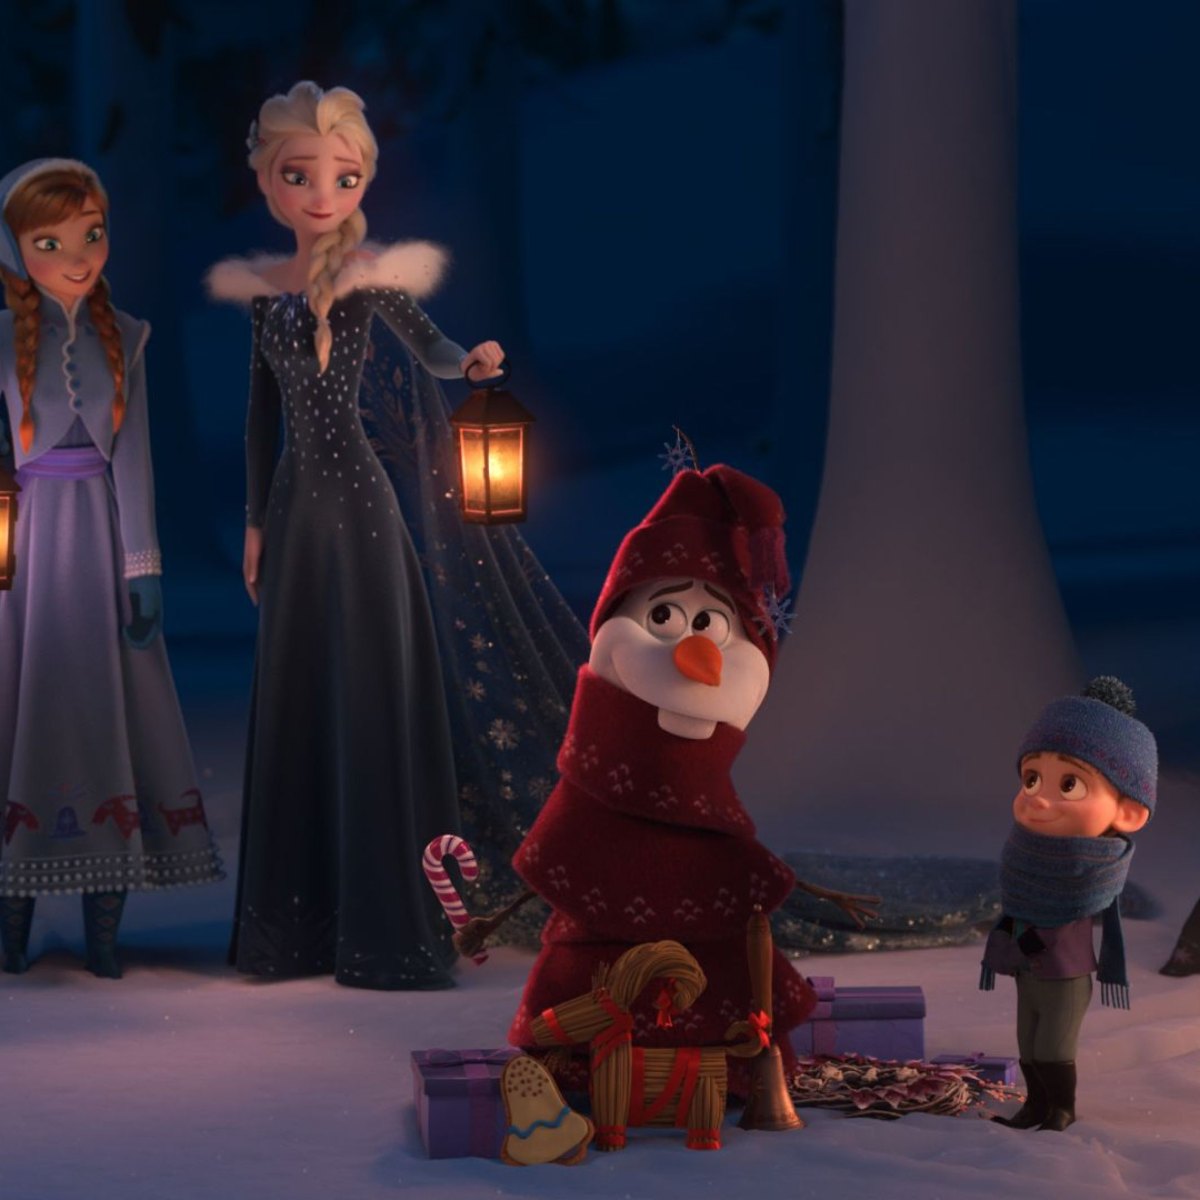 Frozen 3: Release Date, Cast, Story, And More Updates. - Interviewer PR